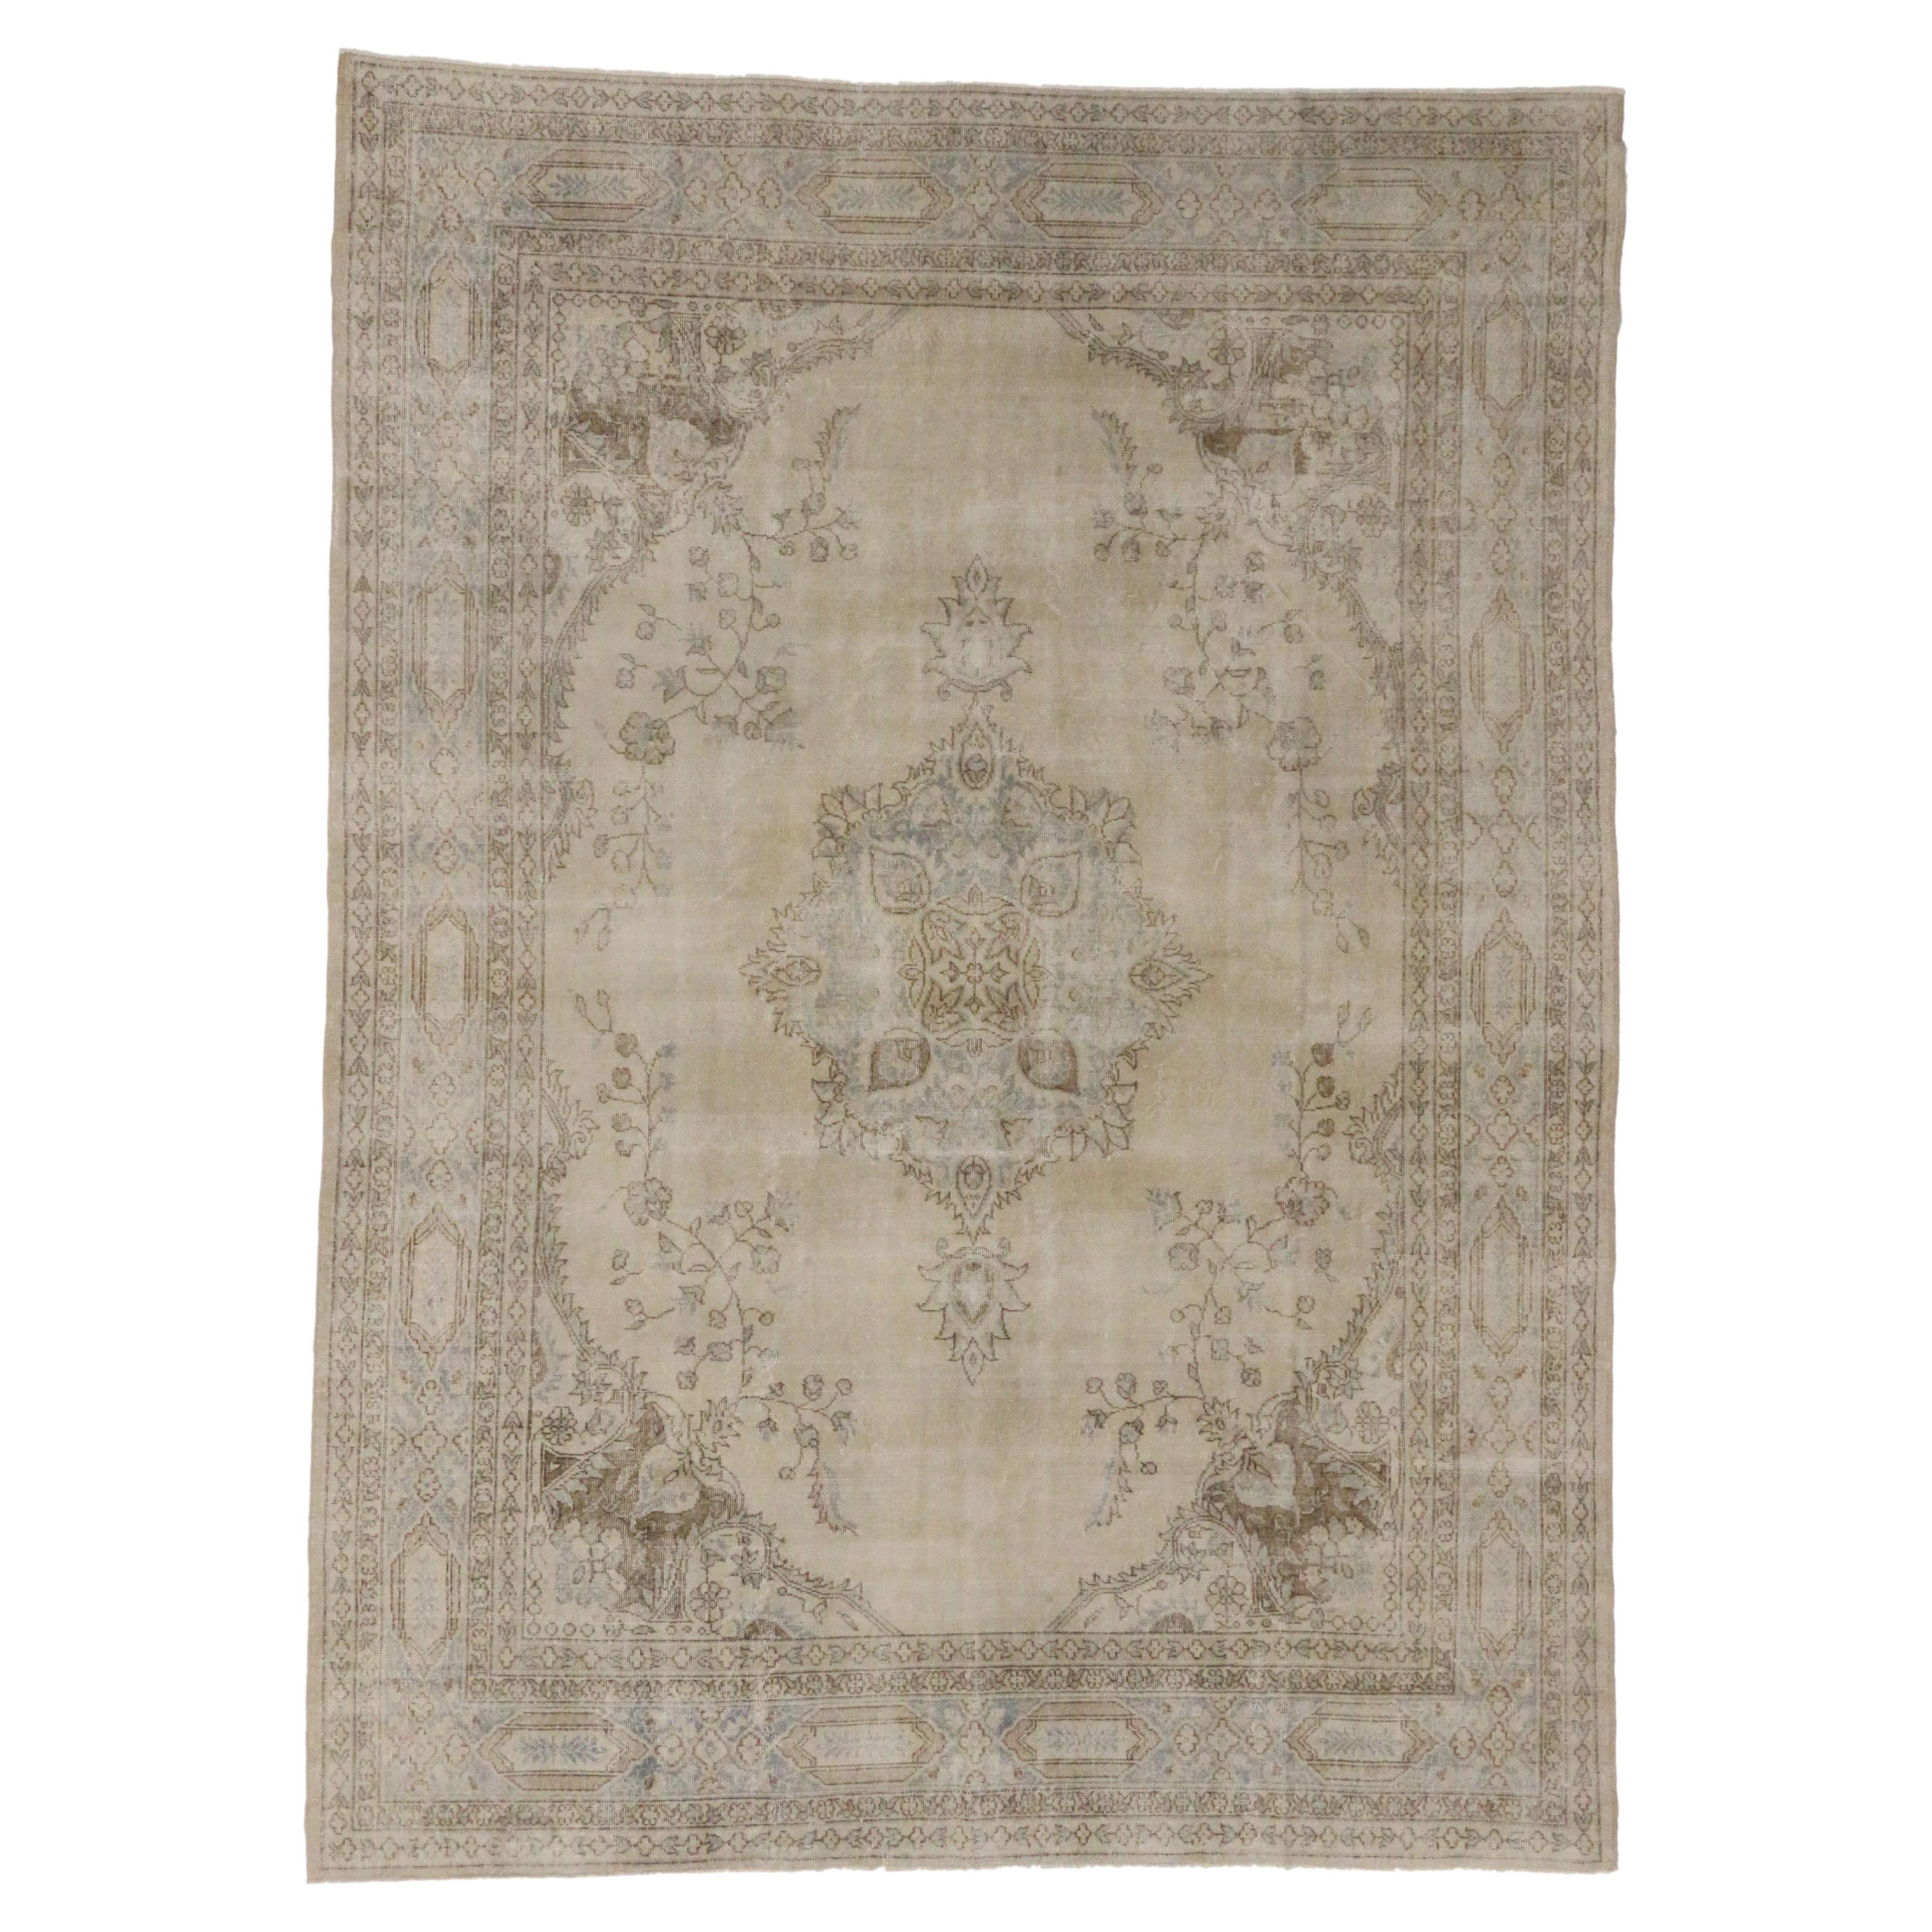 Distressed Turkish Sivas Rug with Shabby Chic Farmhouse Gustavian Style